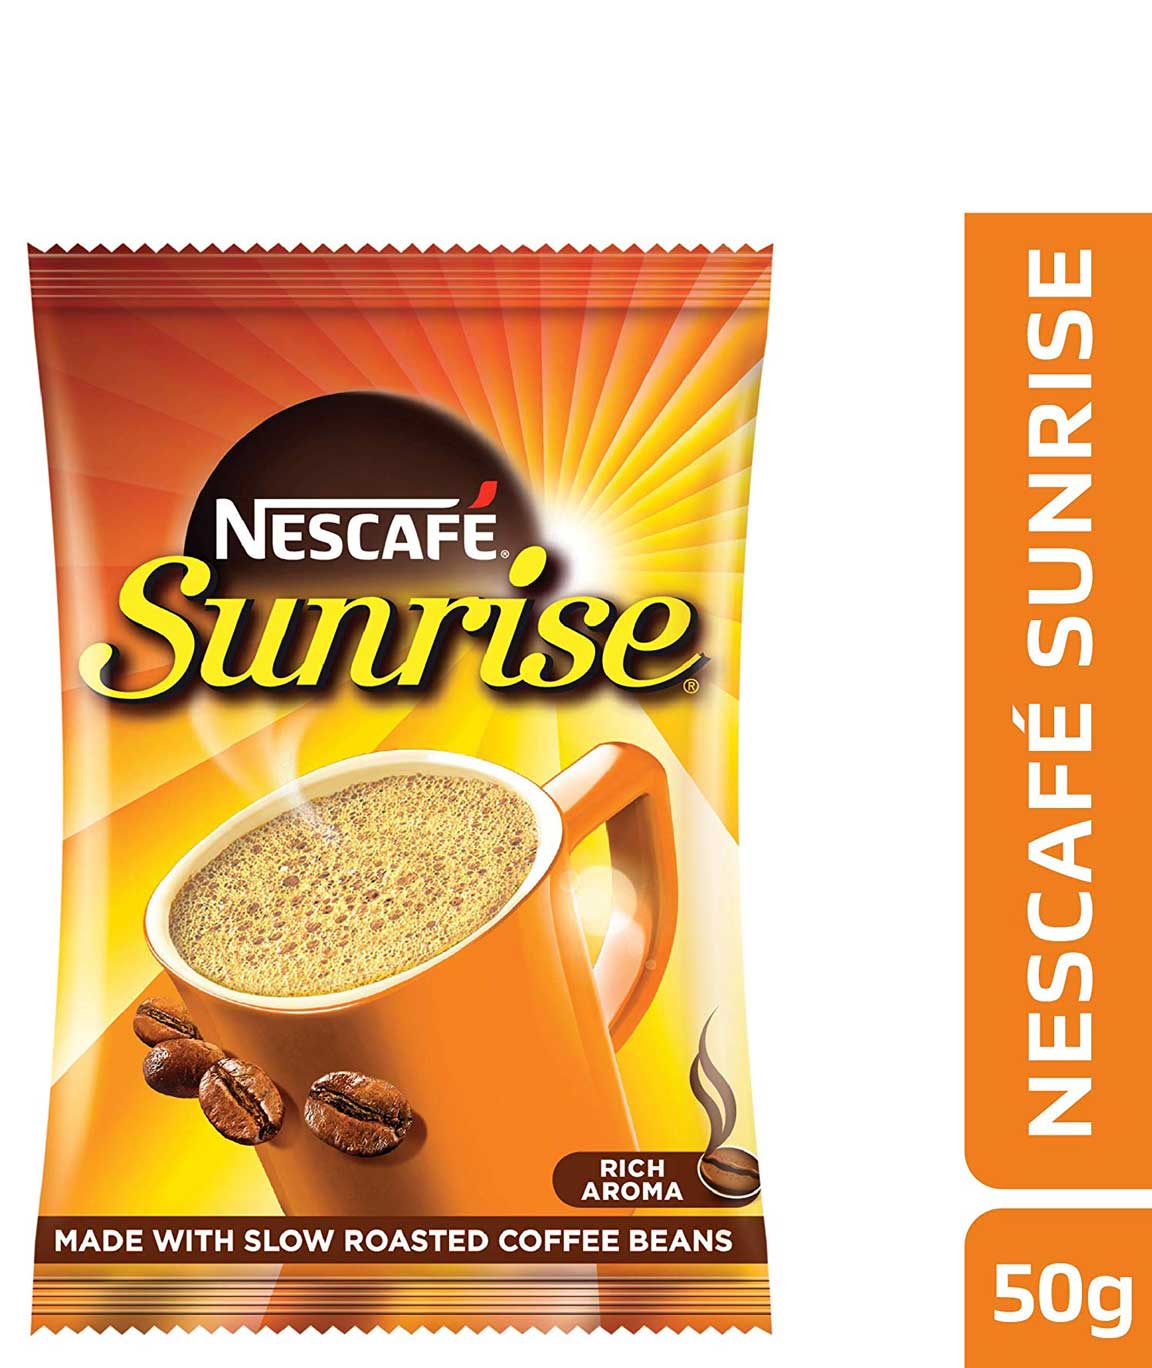 NESCAFE SUNRISE, Instant Coffee-Chicory Mix, 50g pouch